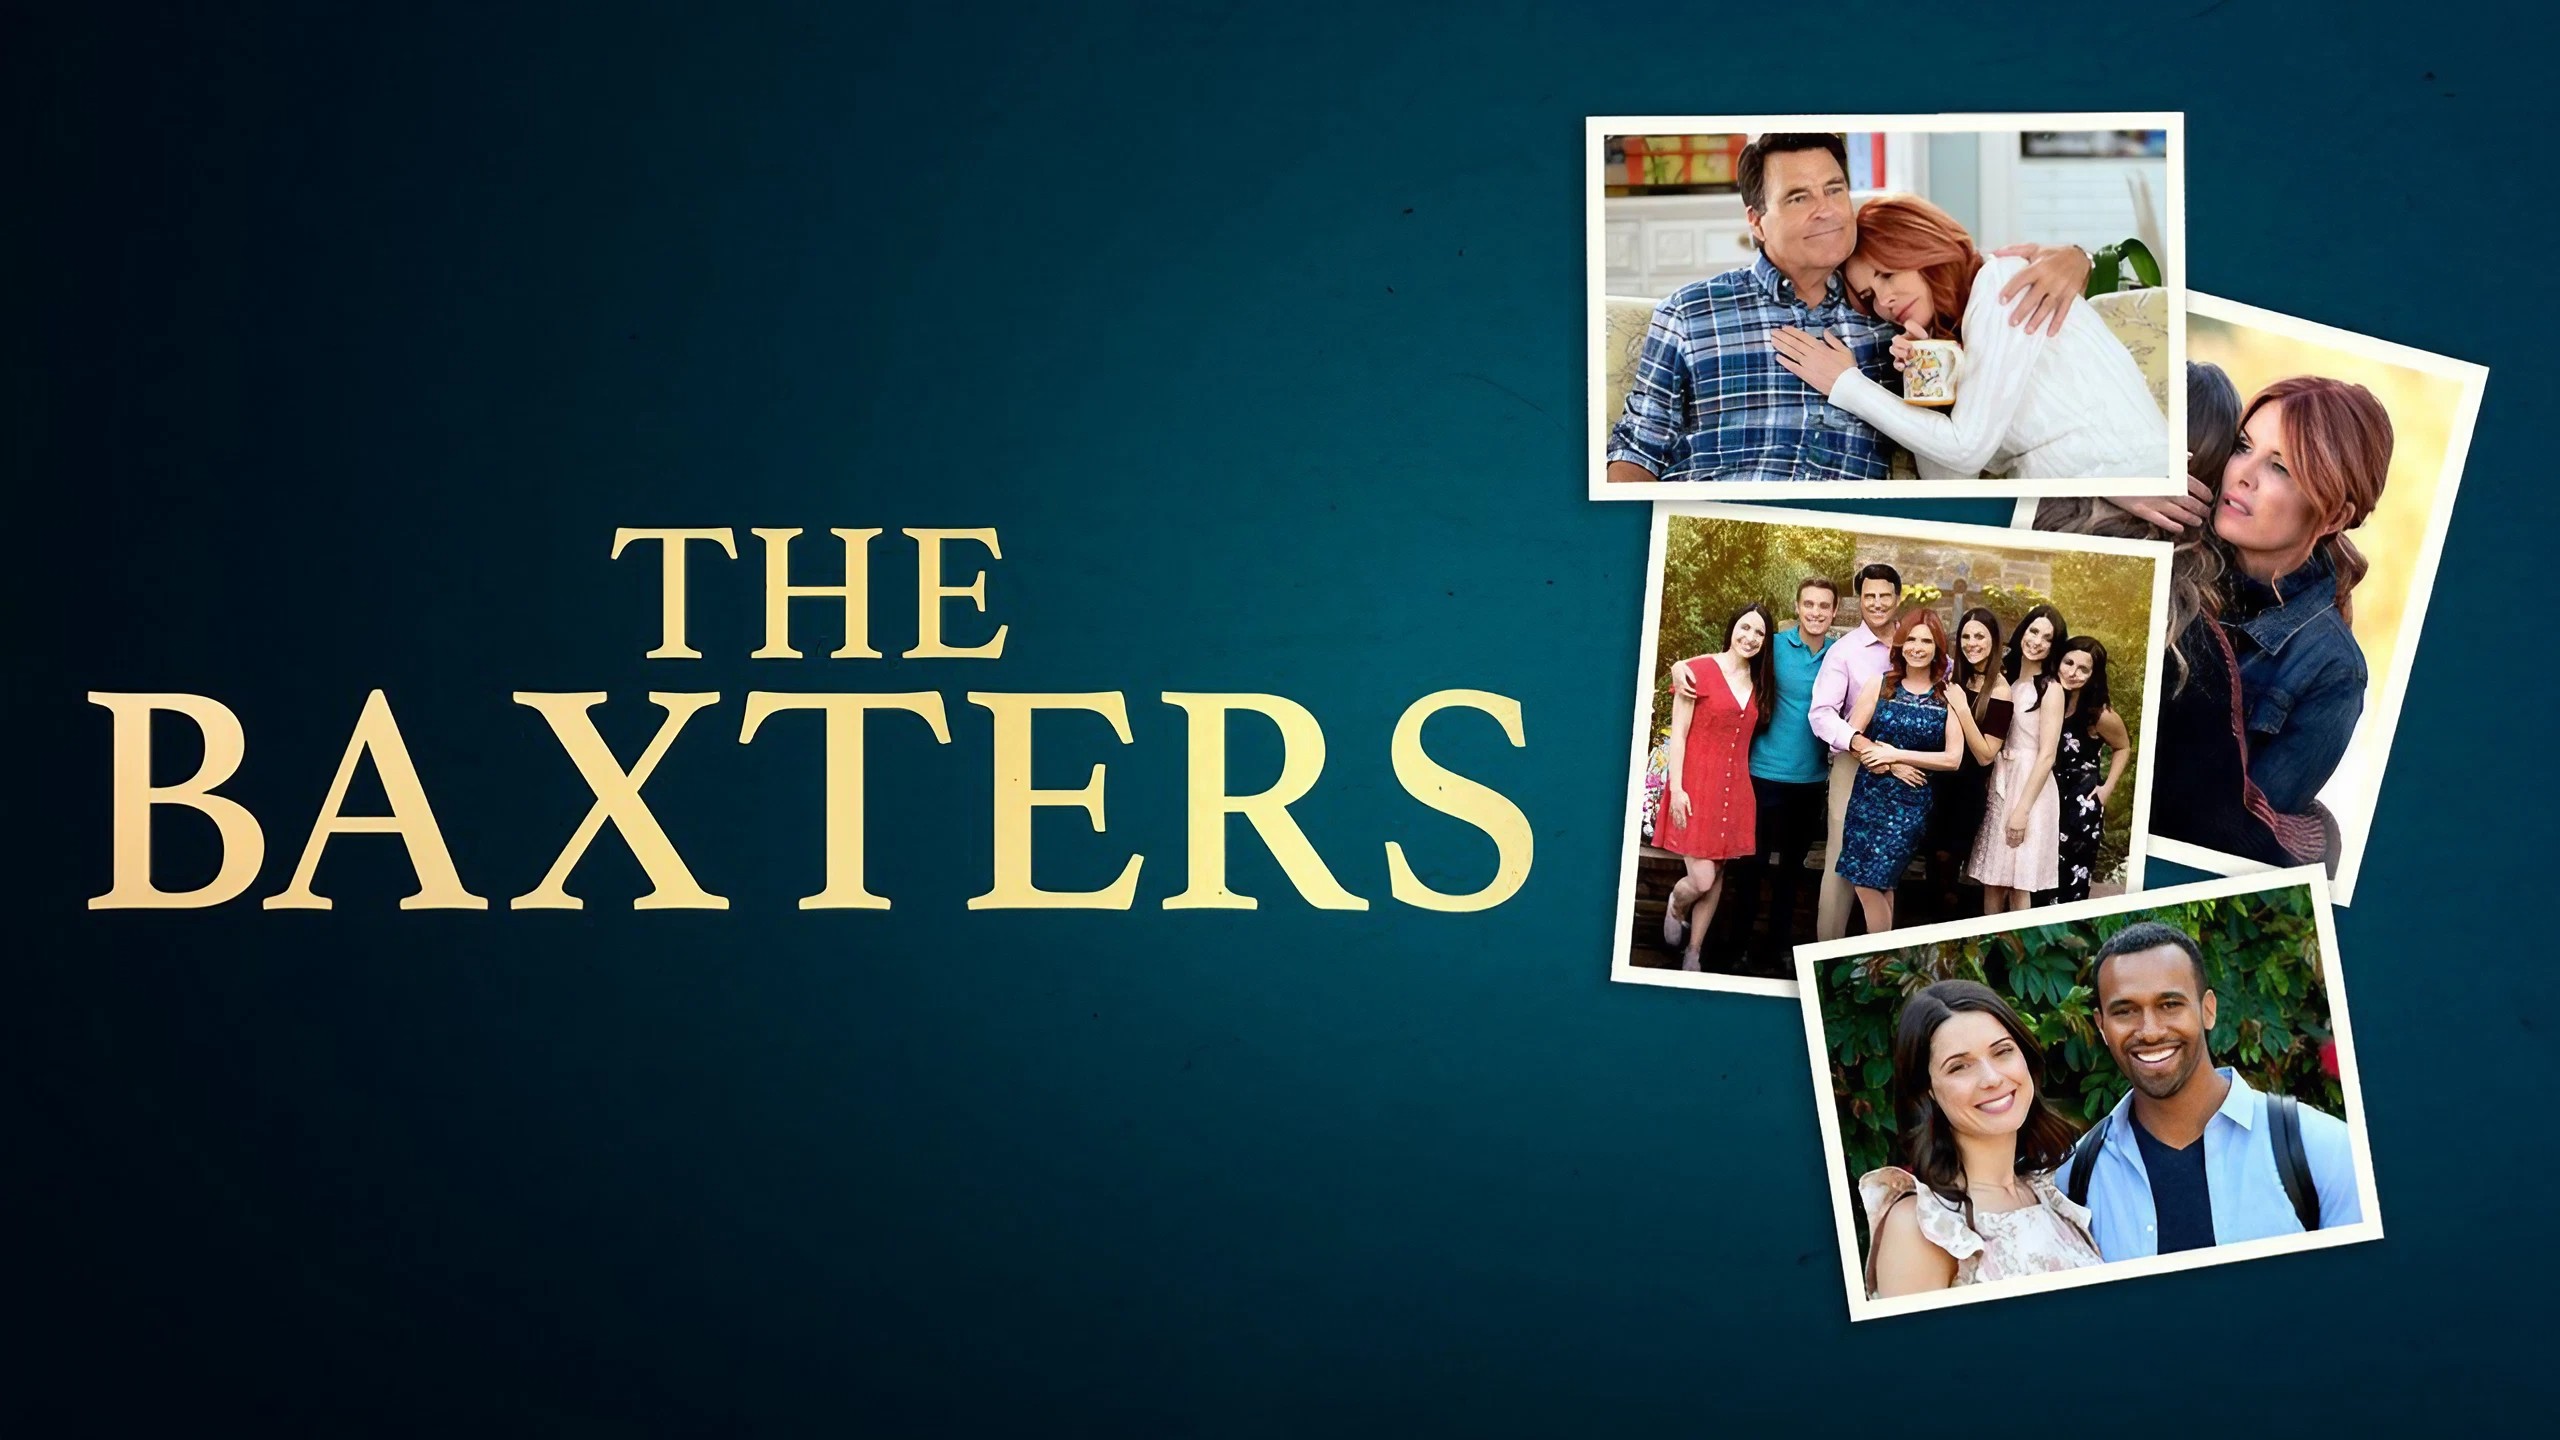 is The Baxters based on a true story